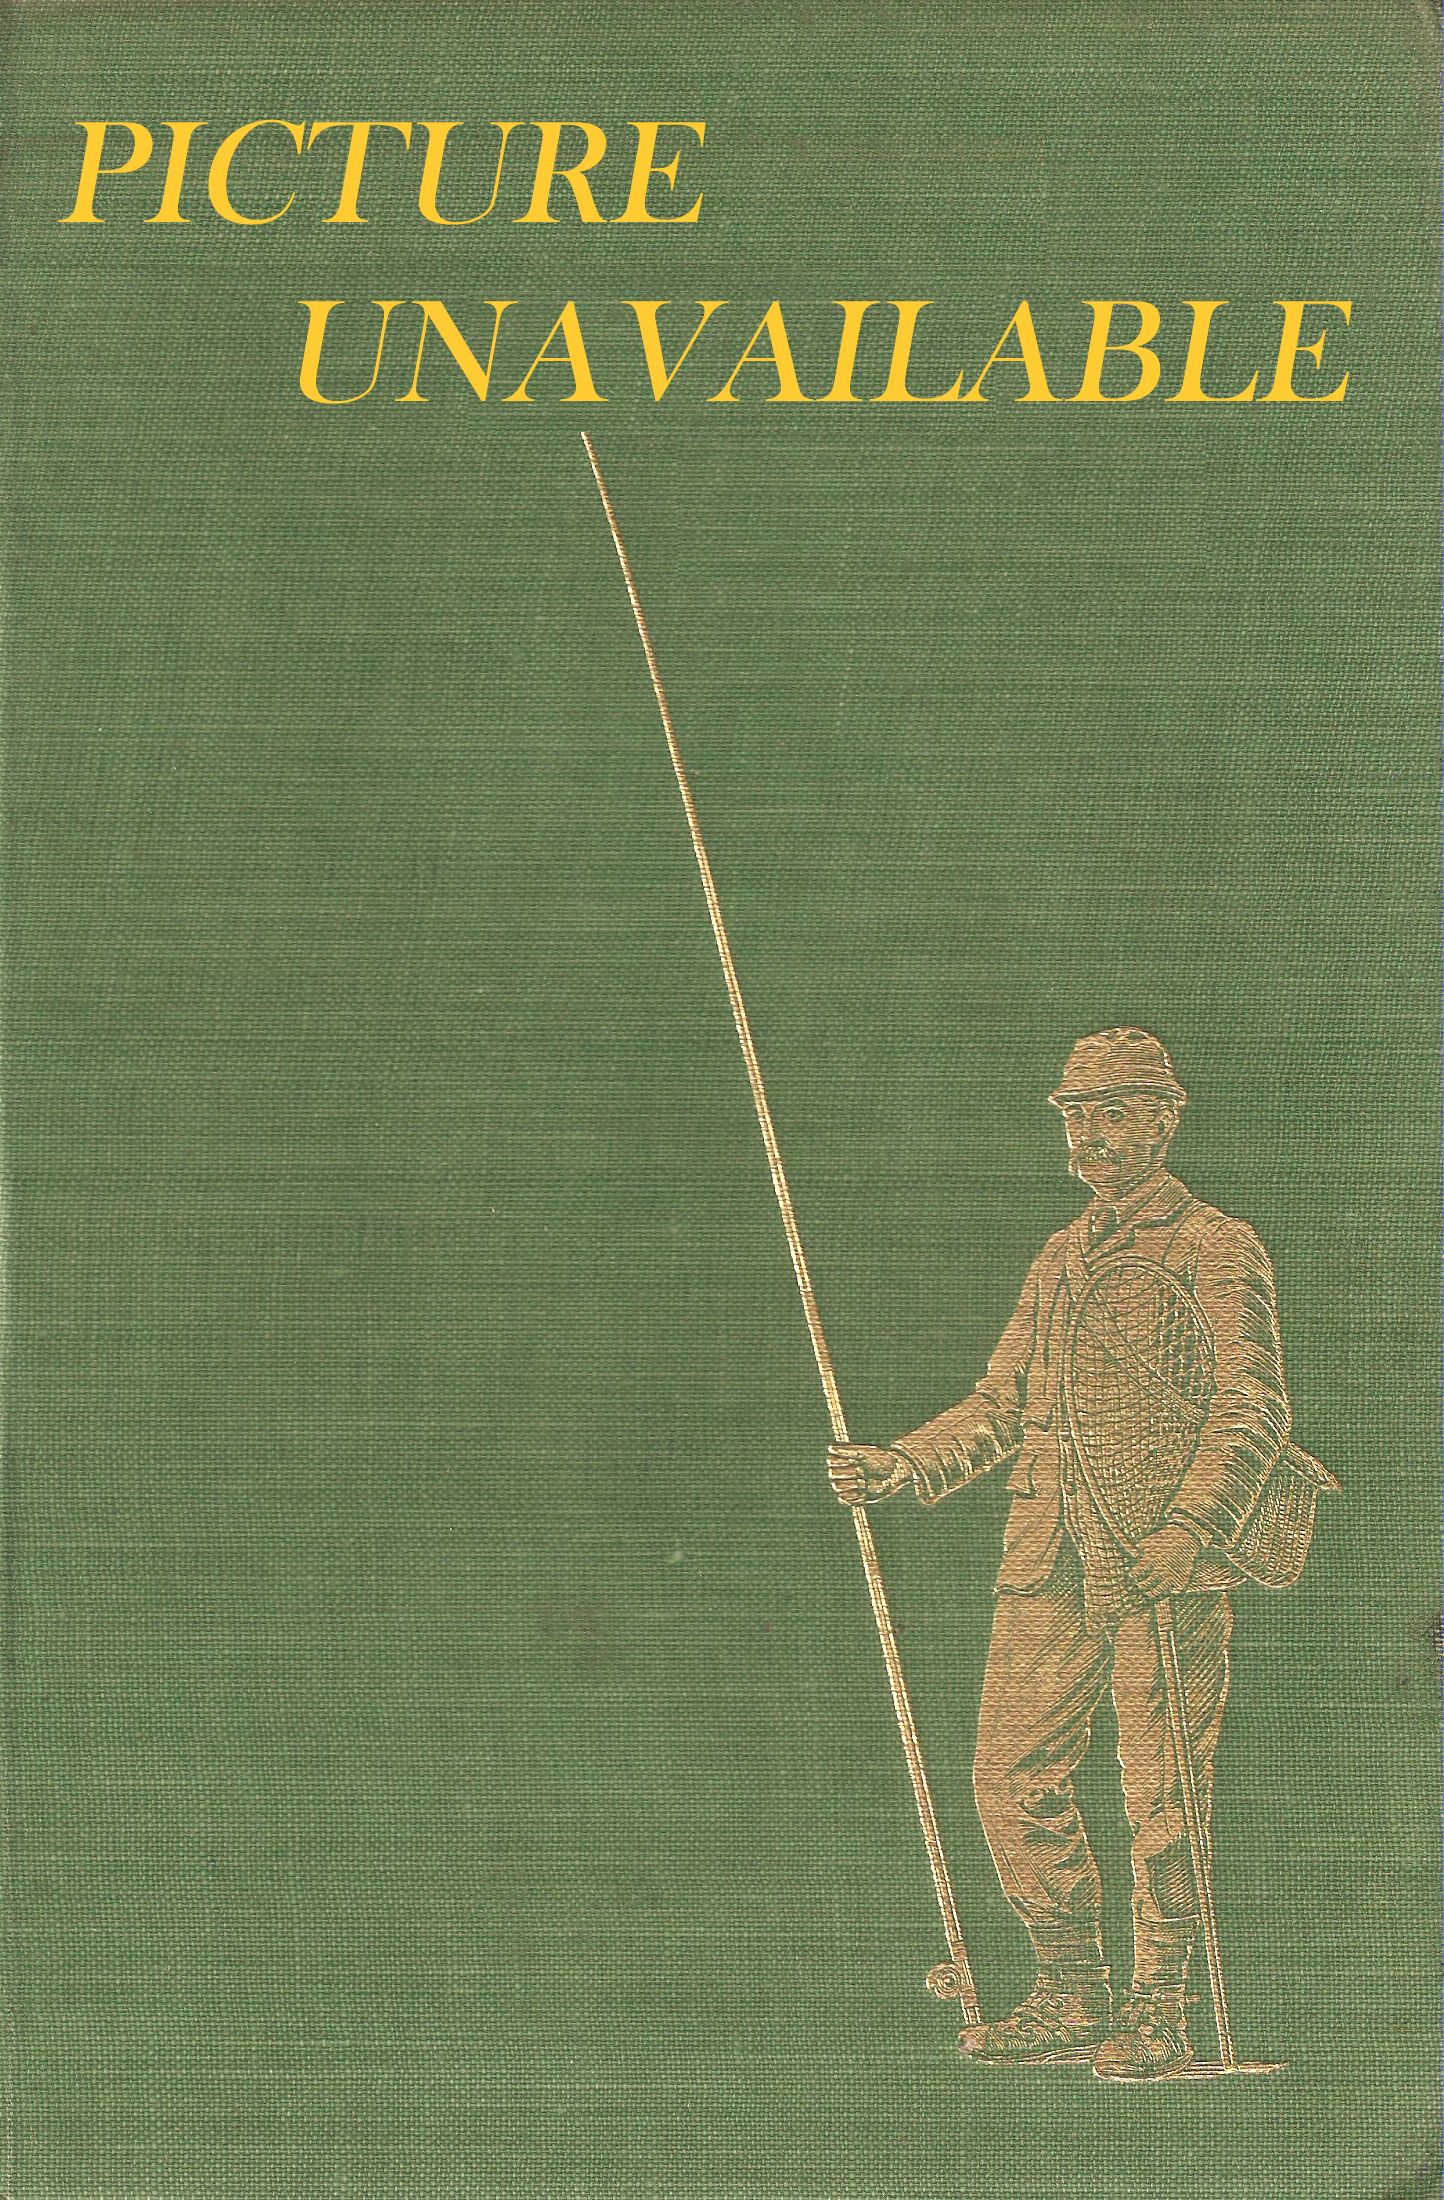 IN SCOTLAND WITH A FISHING ROD. By R. MacDonald Robertson, with an  Introduction by W.J.M. Menzies, F.R.S.E. (Inspector of Salmon Fisheries  for Scotland).